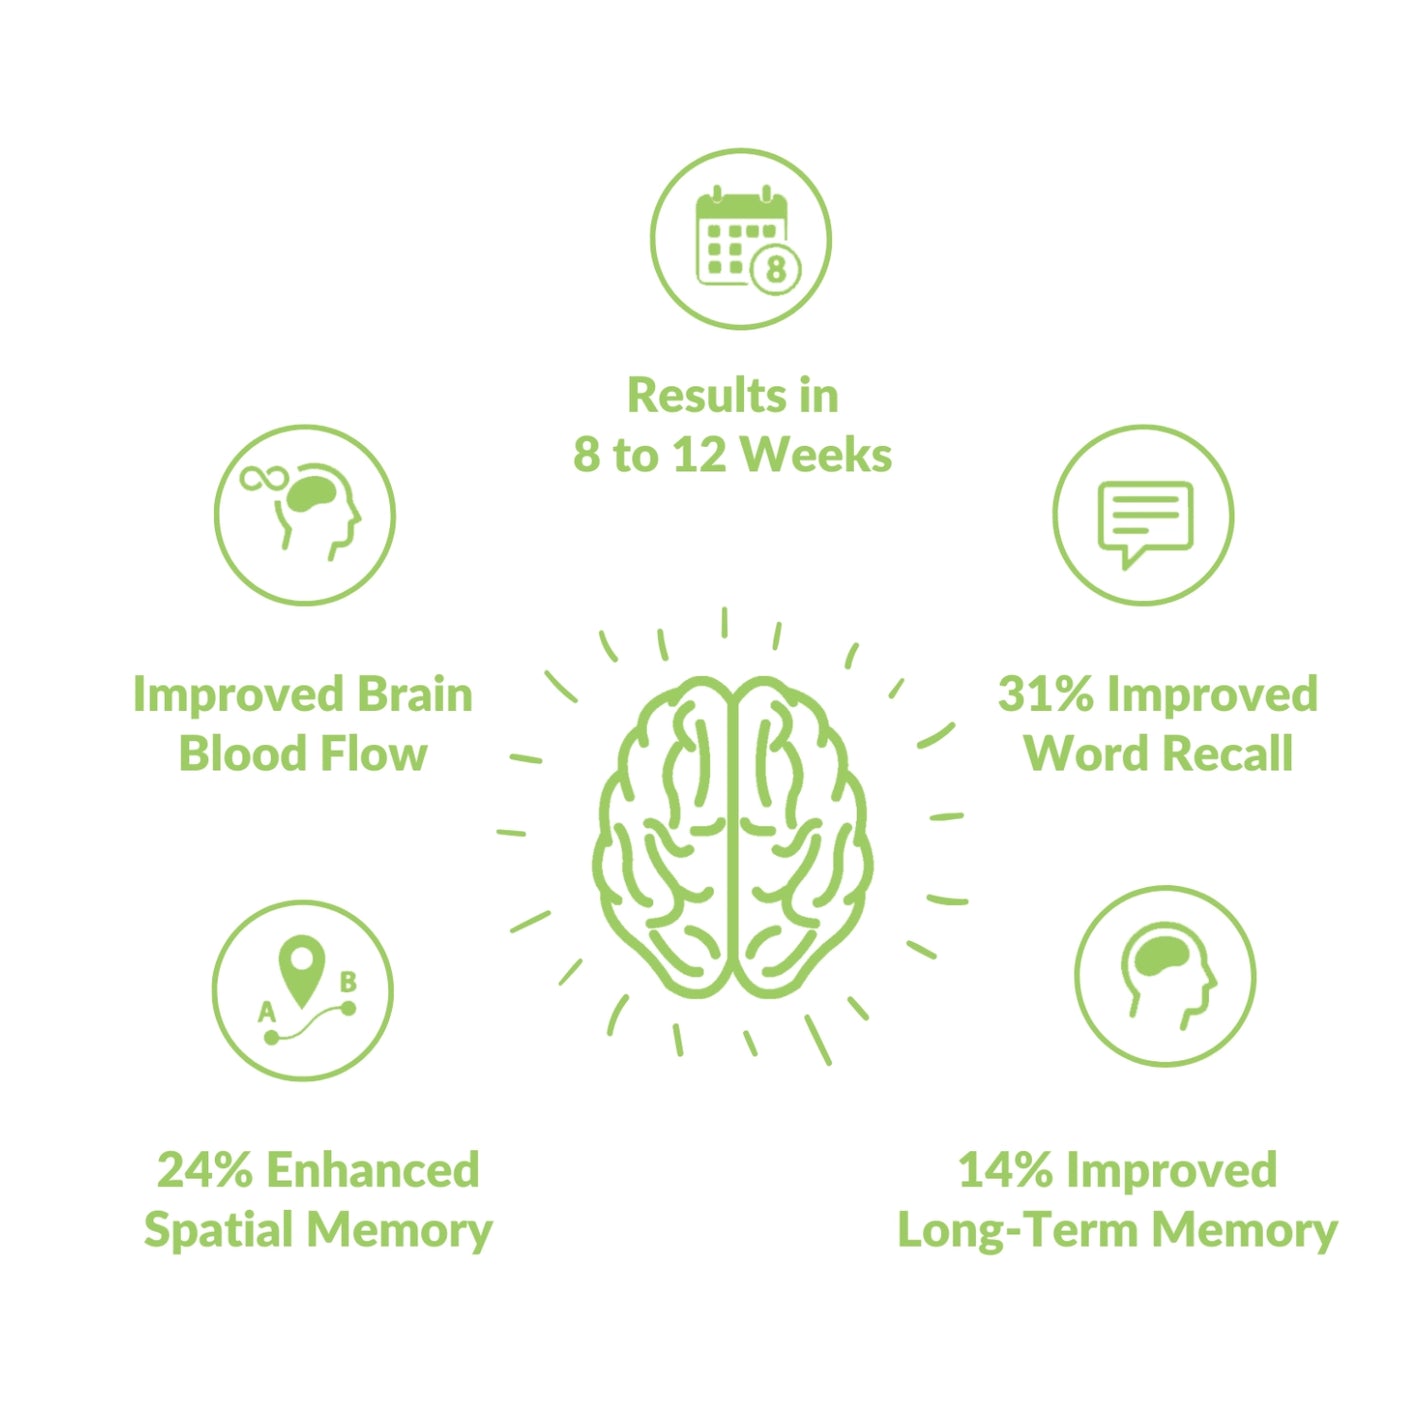 Results in 8 to 12 weeks. 31% Improved Word Recall. 14% Improved Long-Term Memory. 24% Enhanced Spatial Memory. Improved Brain Blood Flow.